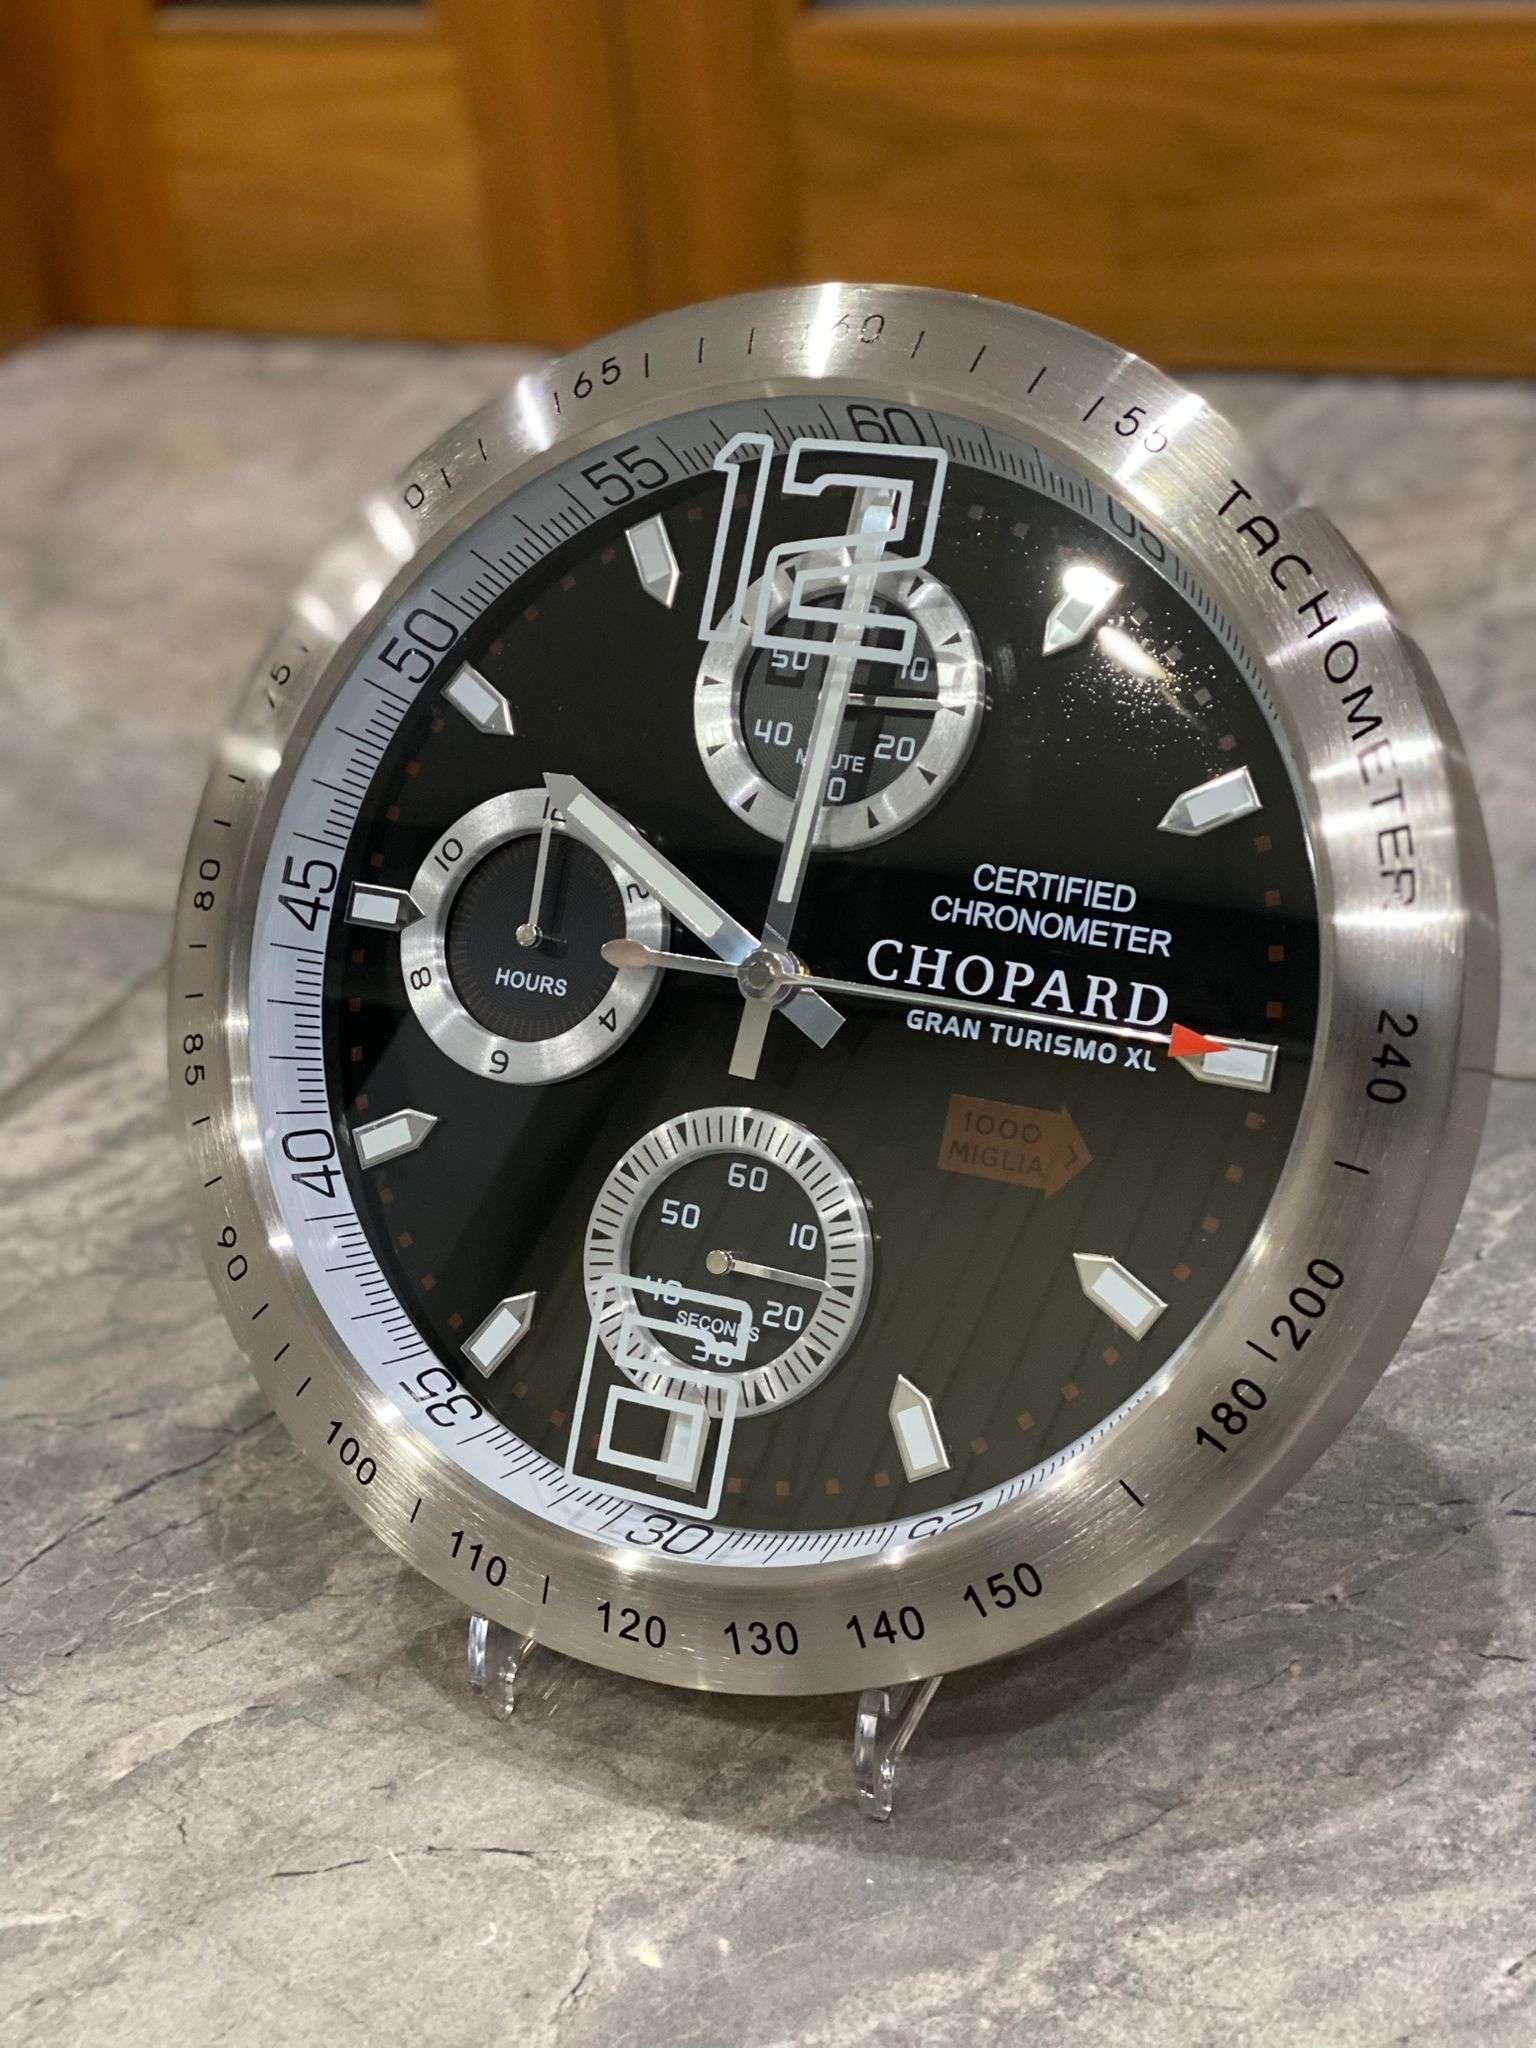 Chopard Officially Certified Chronometer Gran Turismo Chrome Wall Clock. With luminous hands, sweeping hands.
Free international shipping.